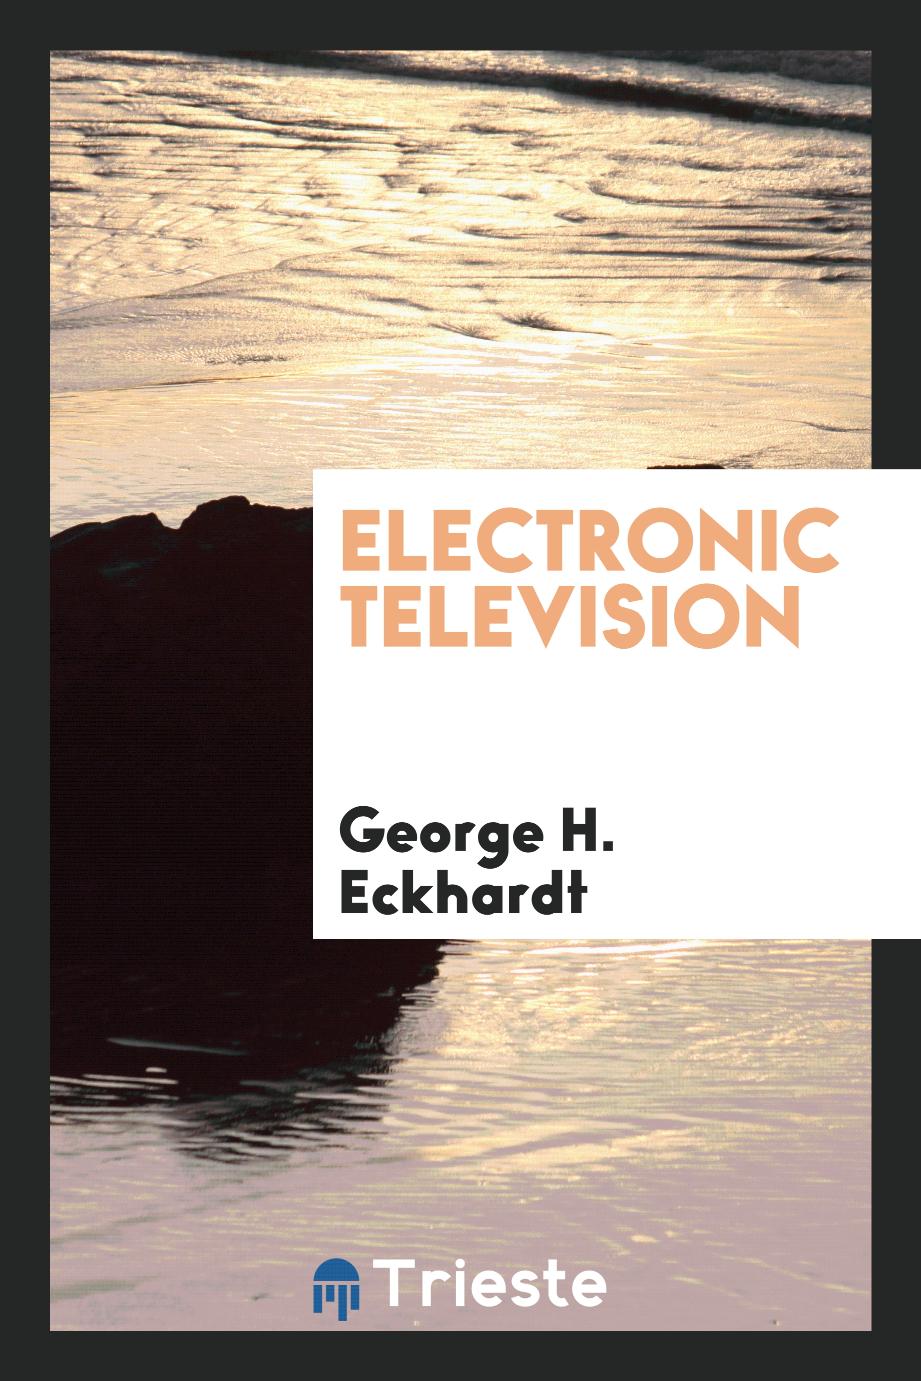 Electronic television